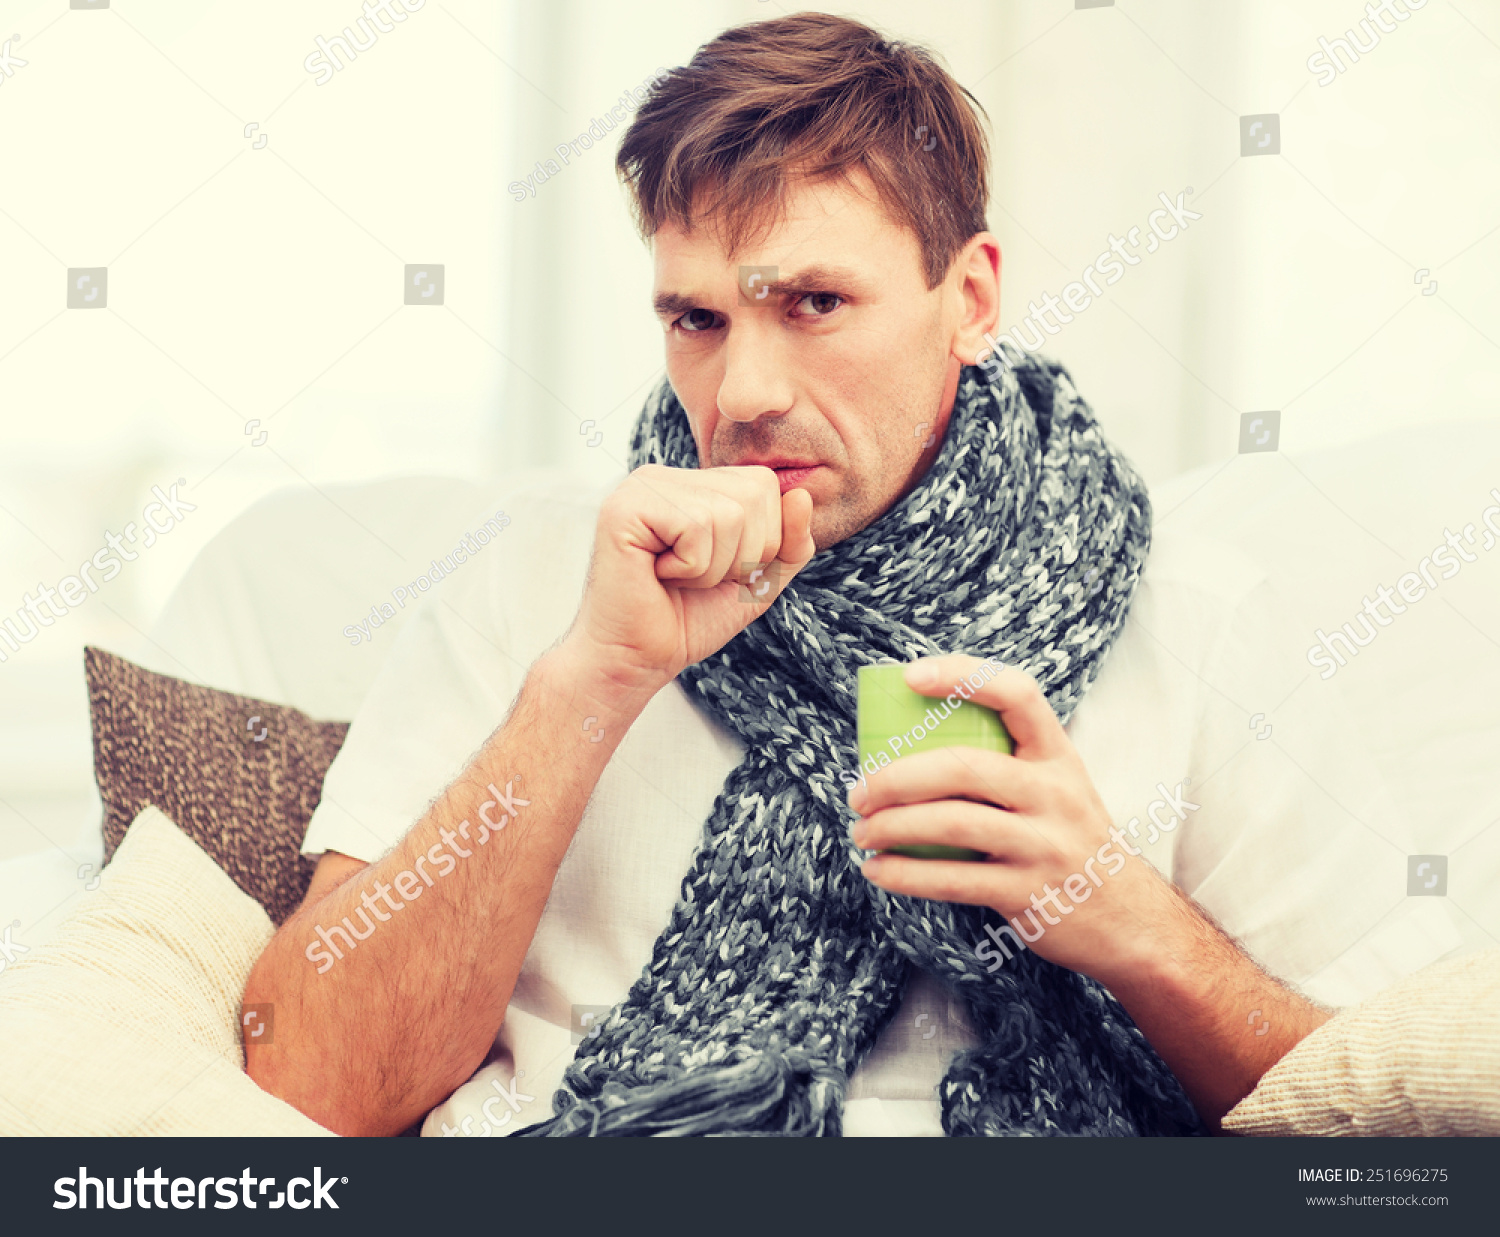 healthcare and medicine concept - ill man with flu at home #251696275